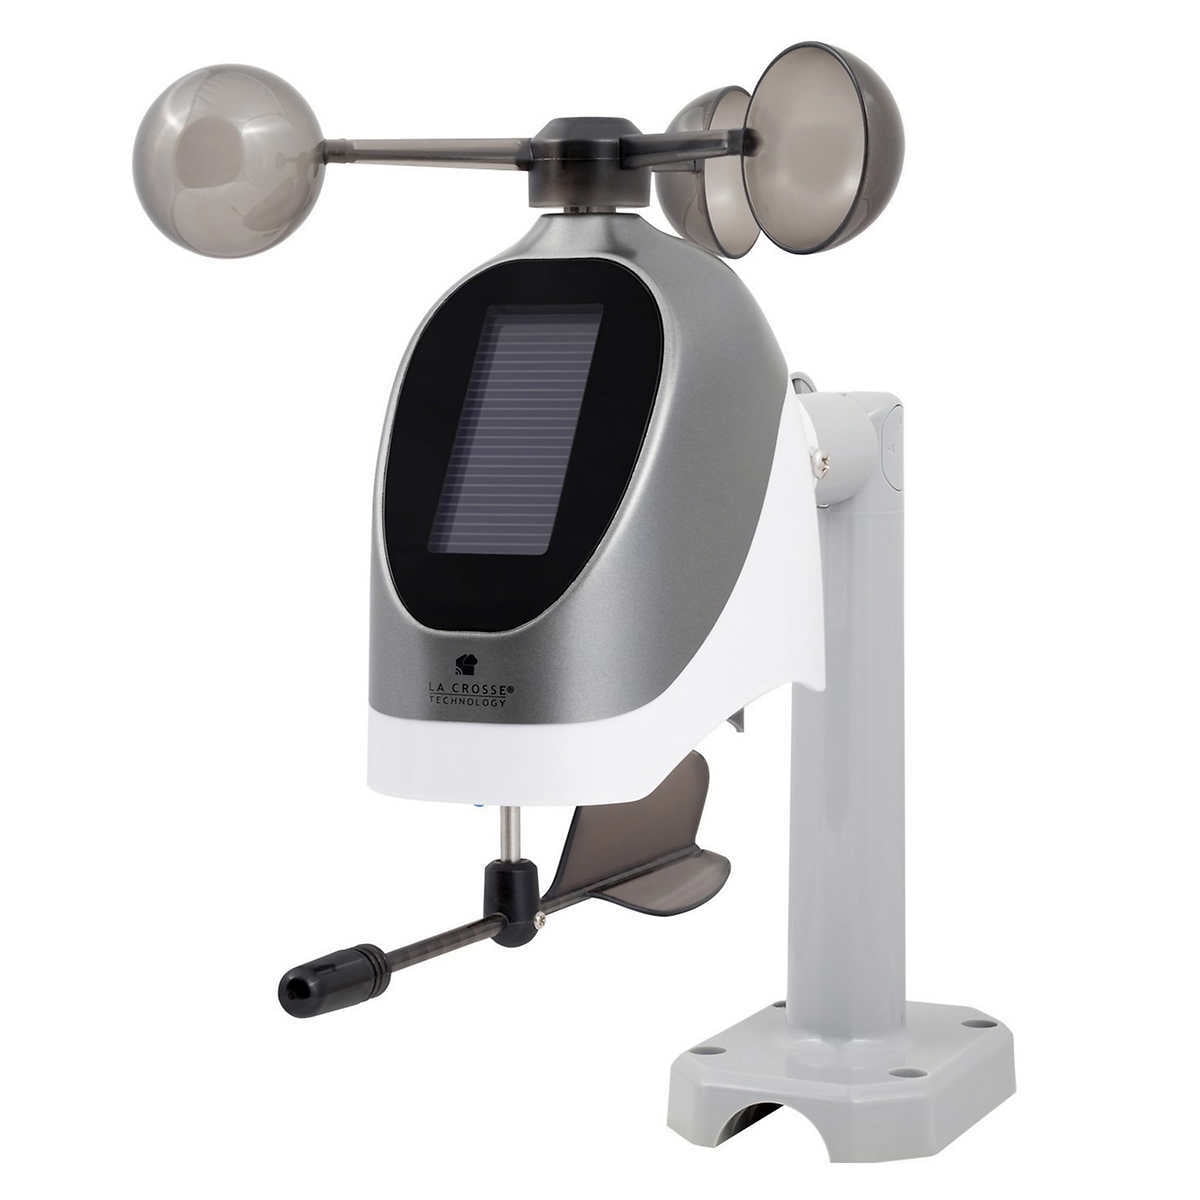 The Weather Channel® Wireless Weather Station With Sensor by La